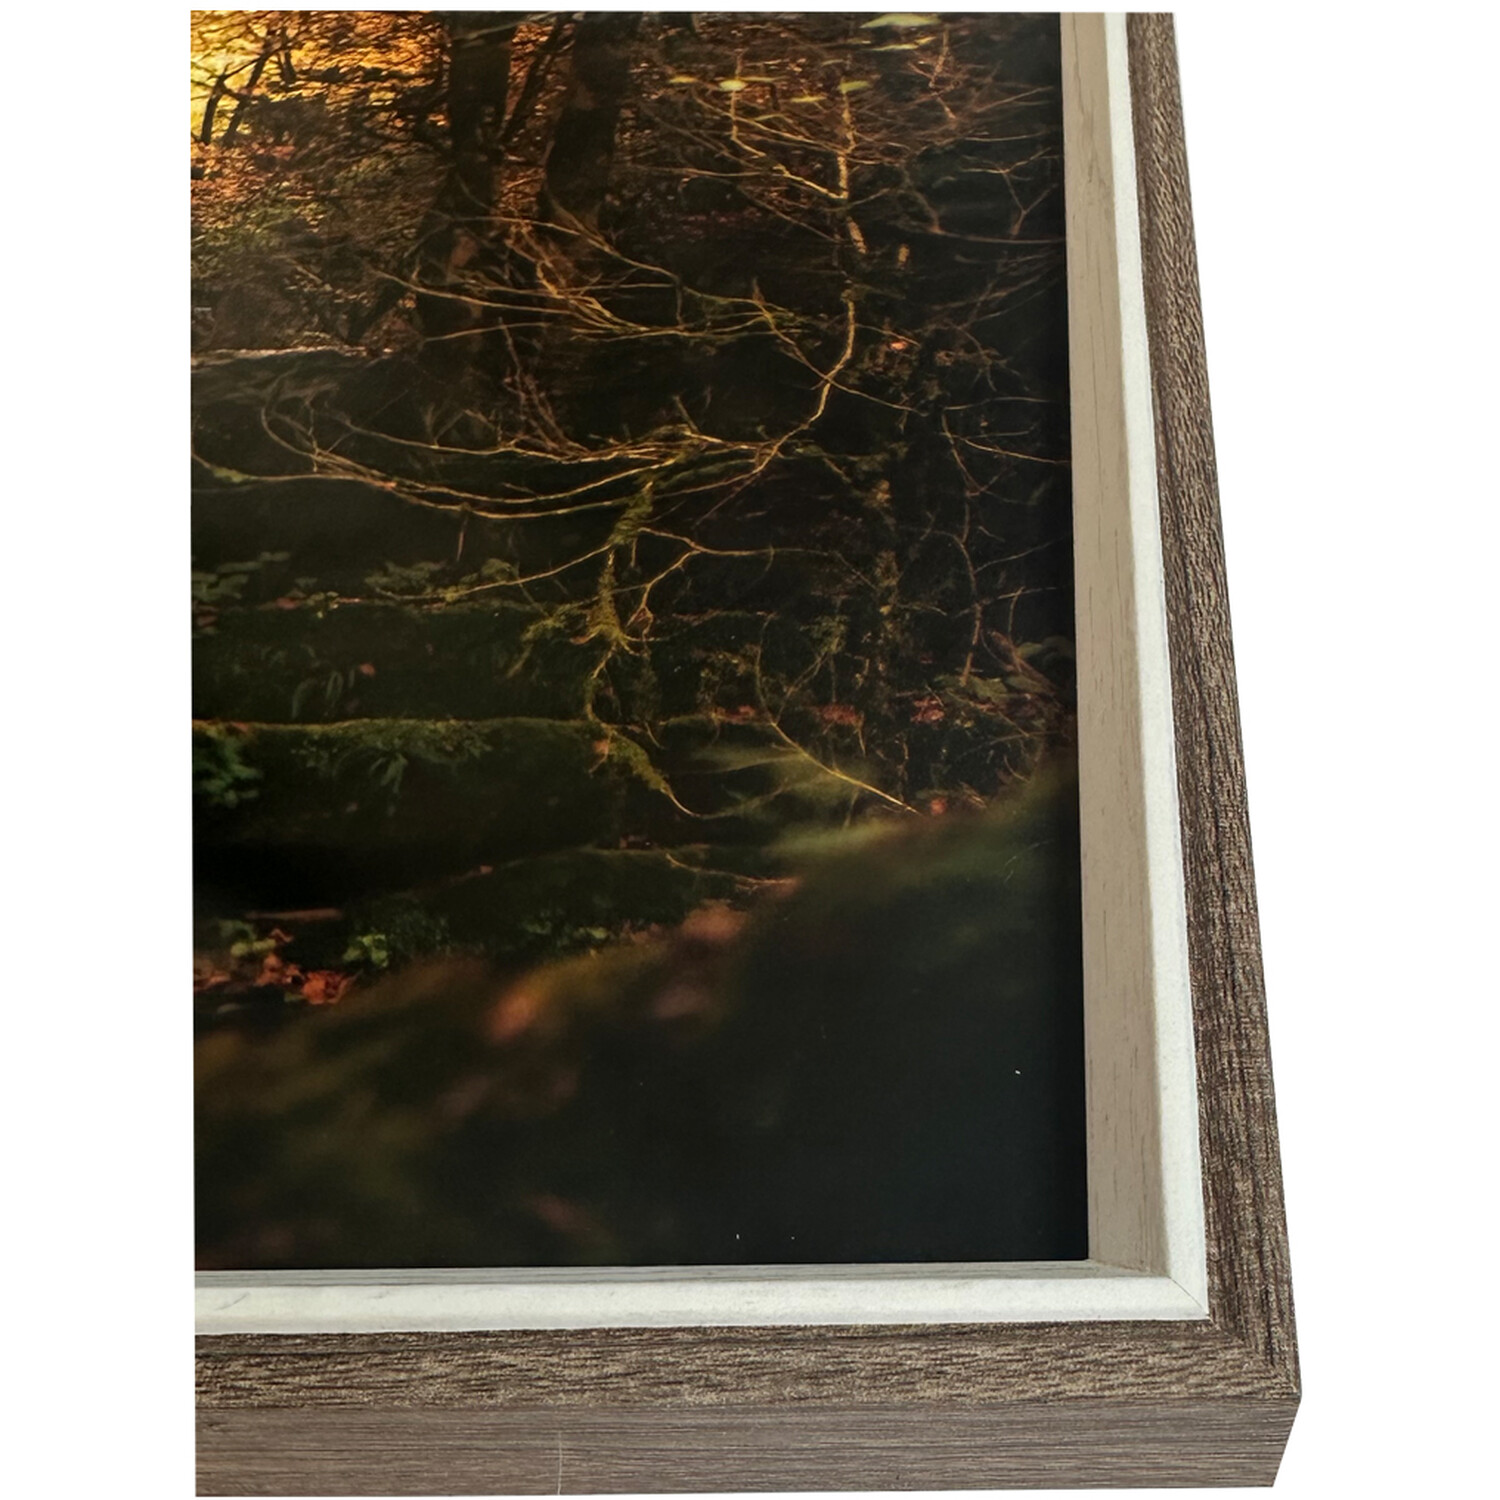 Zoey Rustic Wood Effect Frame - Brown / 20x16in Image 3